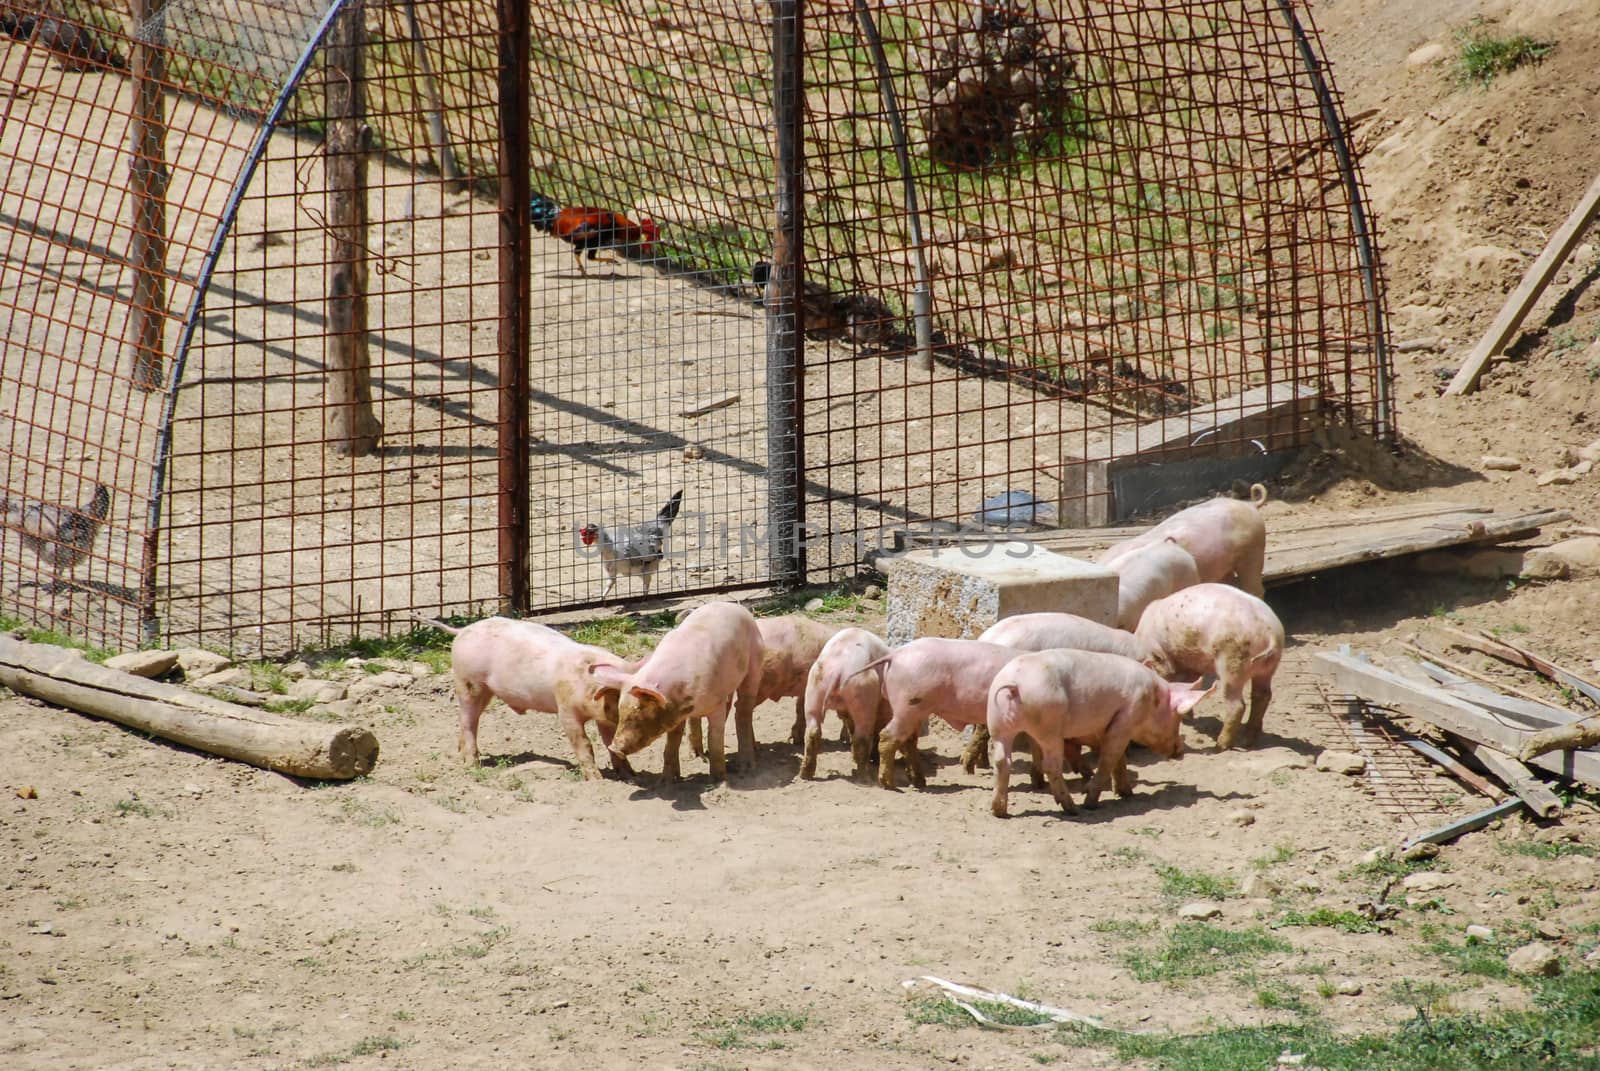 Some piglets looking for food by cosca